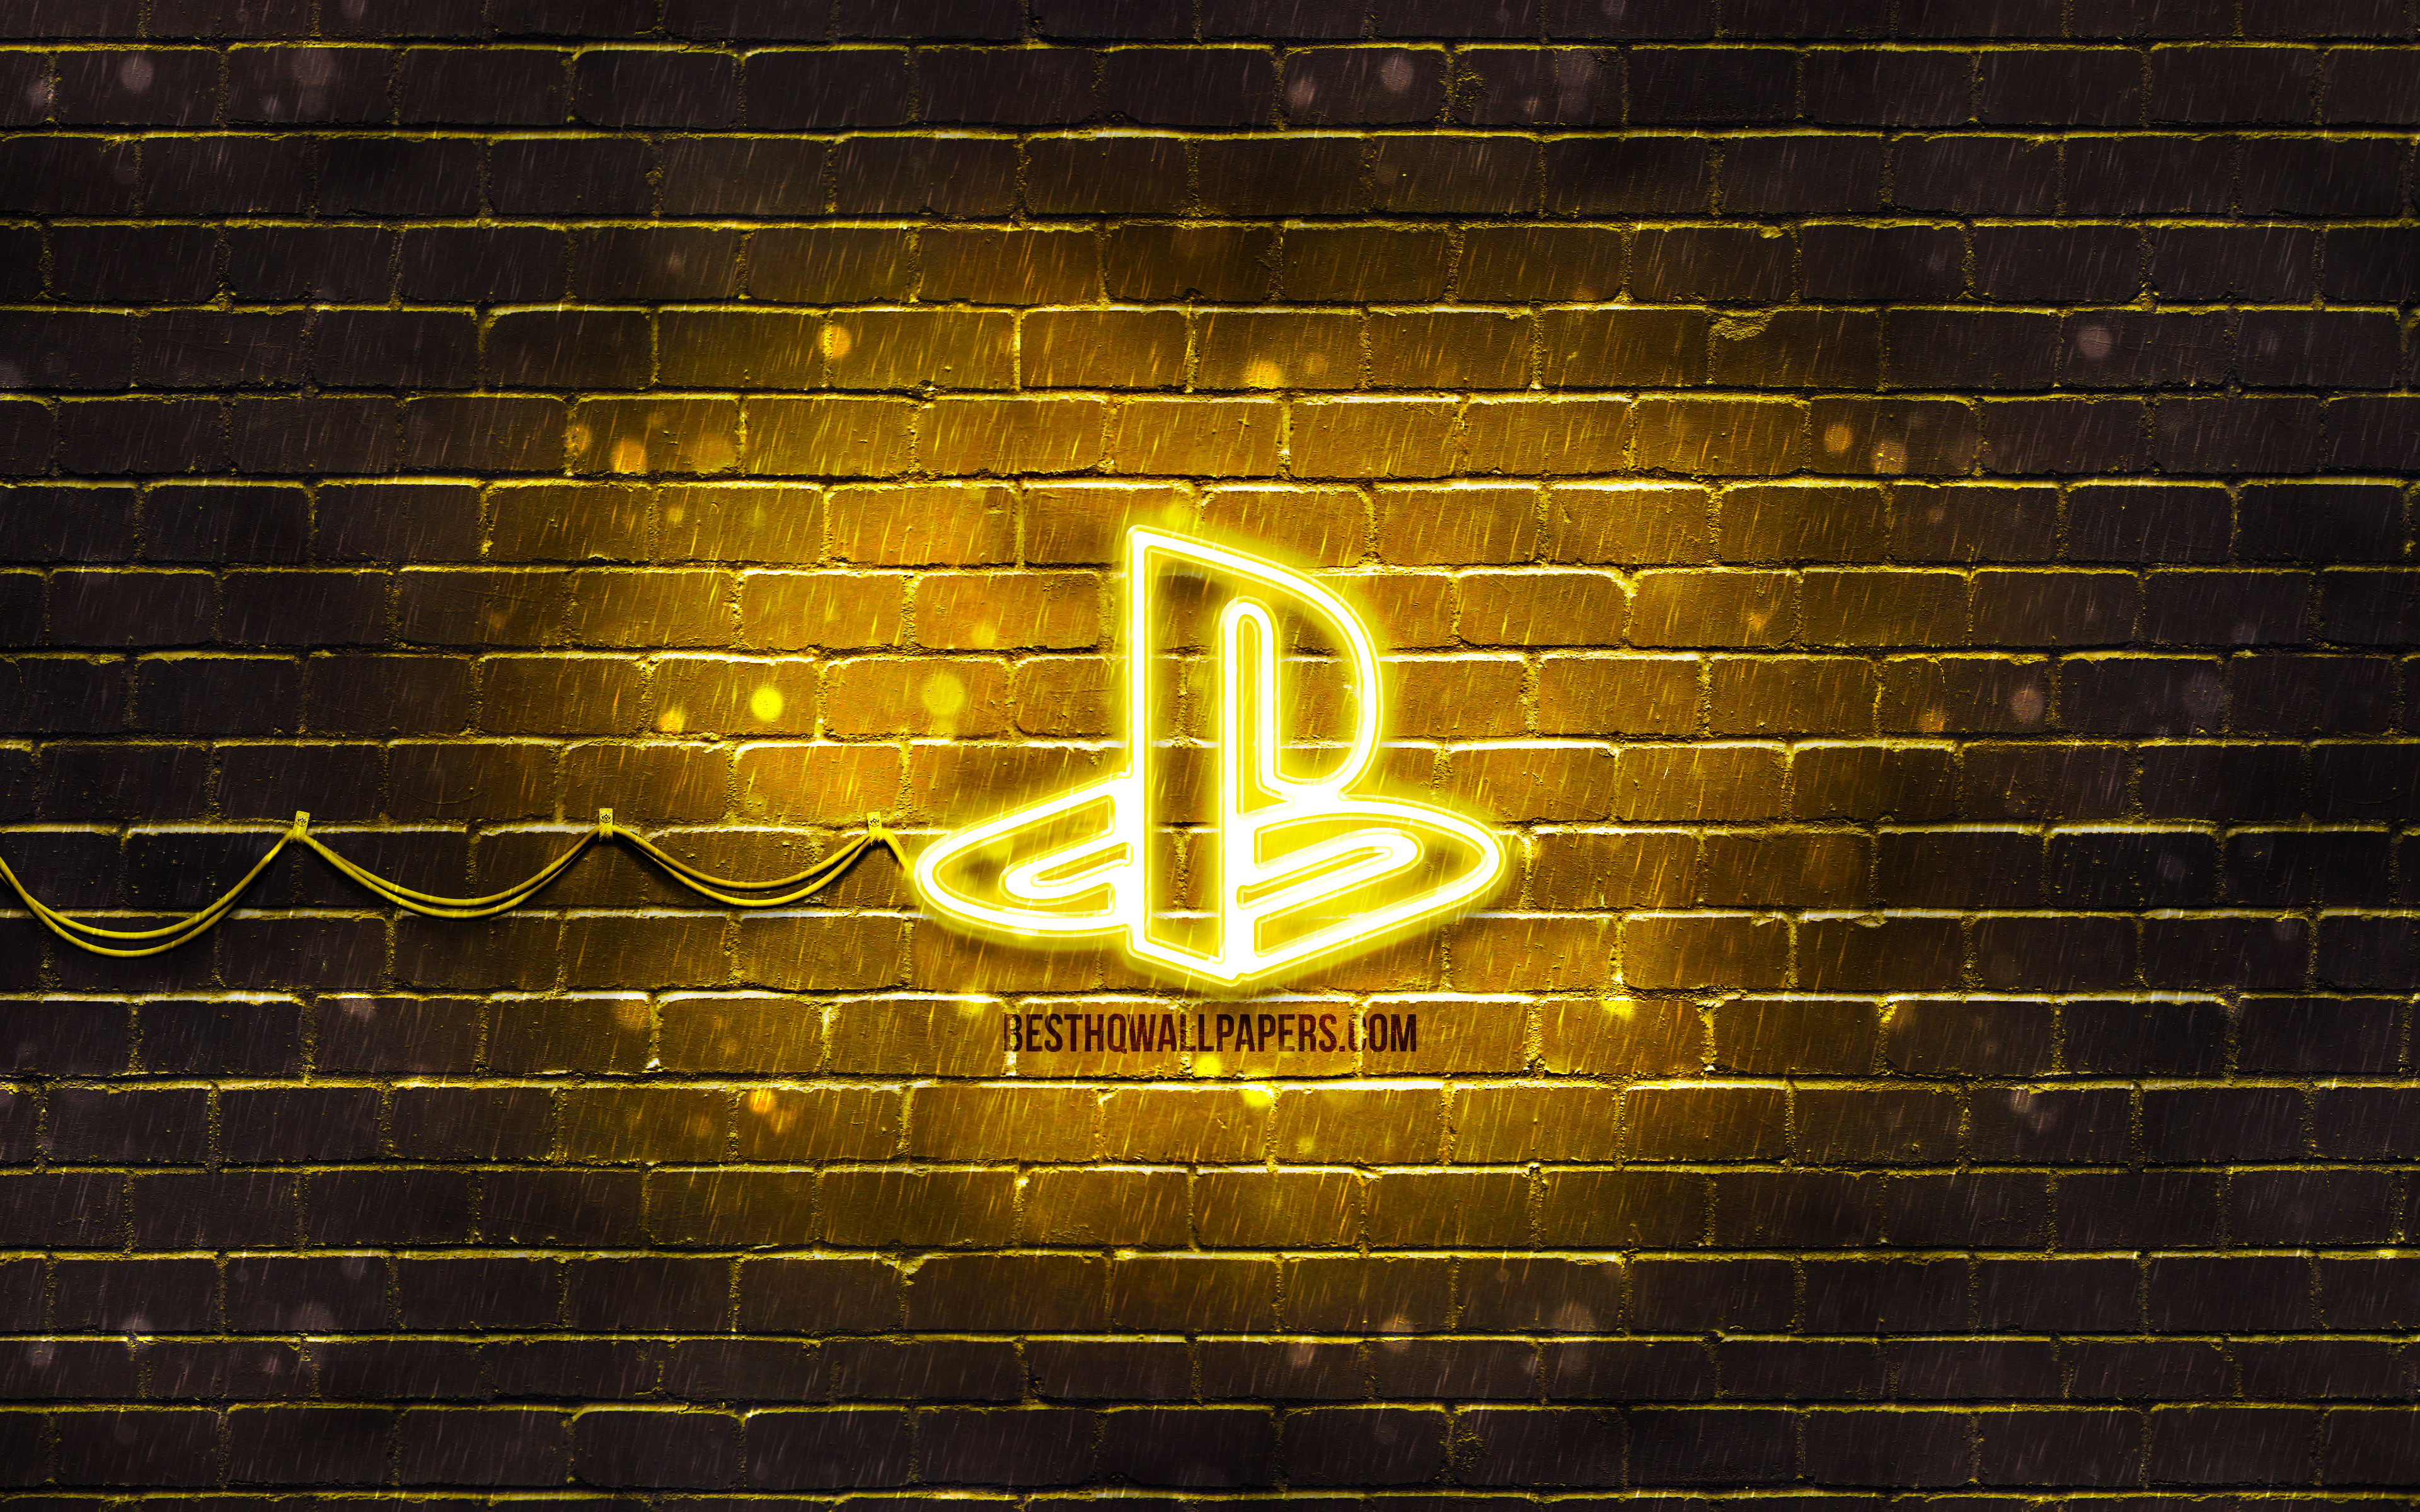 Download wallpaper PlayStation yellow logo, 4k, yellow brickwall, PlayStation logo, brands, PlayStation neon logo, PlayStation for desktop with resolution 3840x2400. High Quality HD picture wallpaper